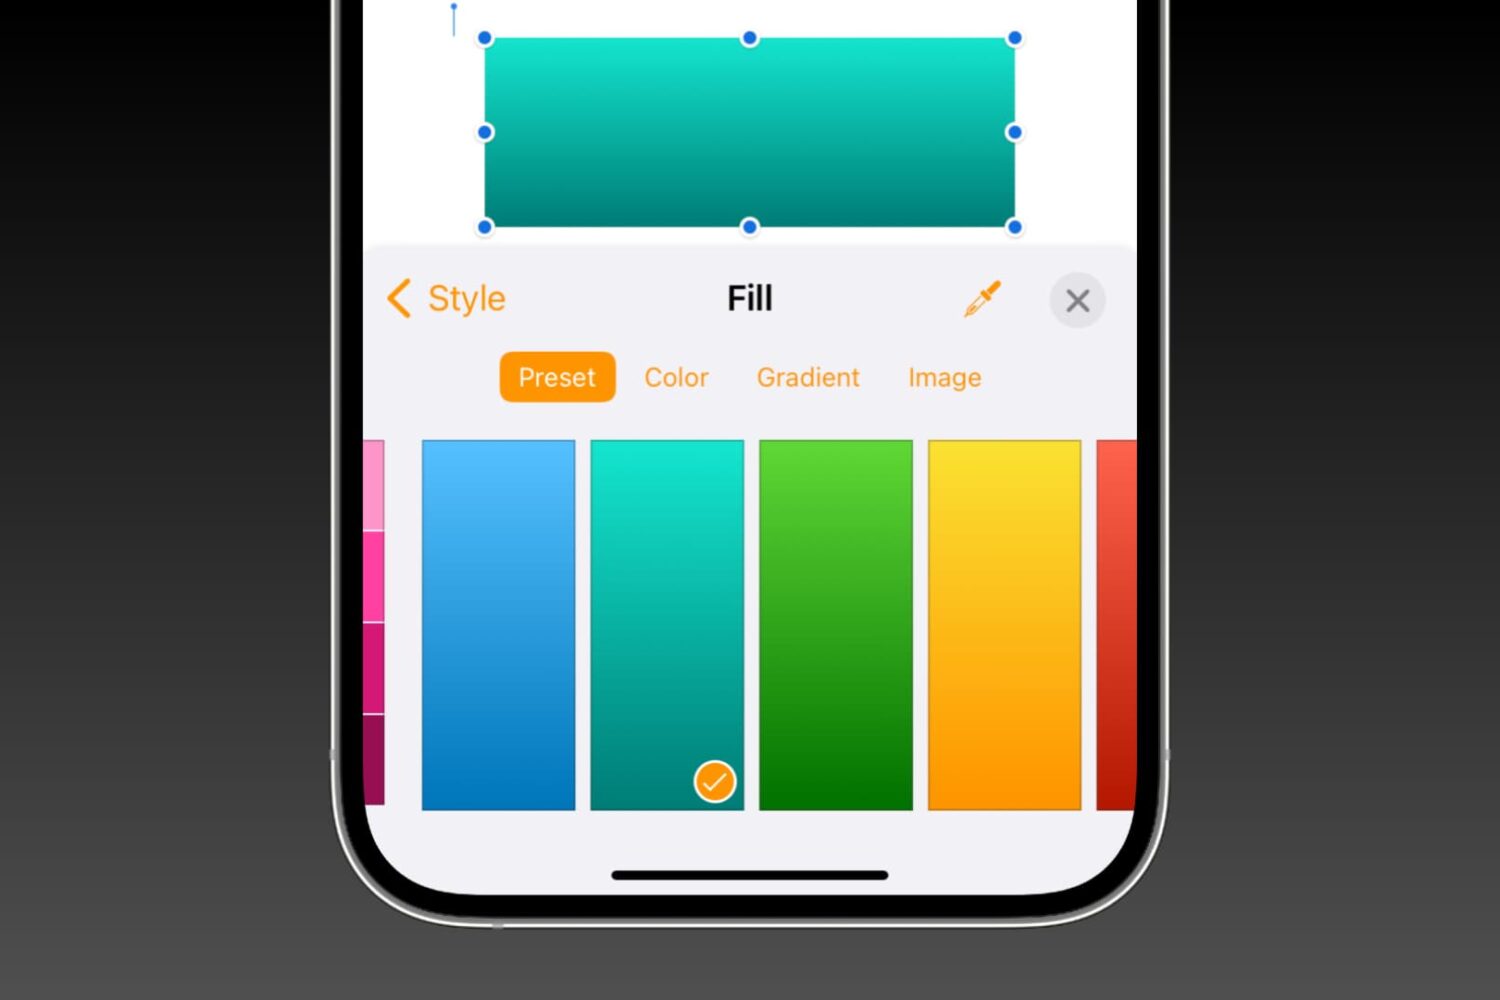 Option to fill a shape with color, gradient, or image in the Pages app on iPhone